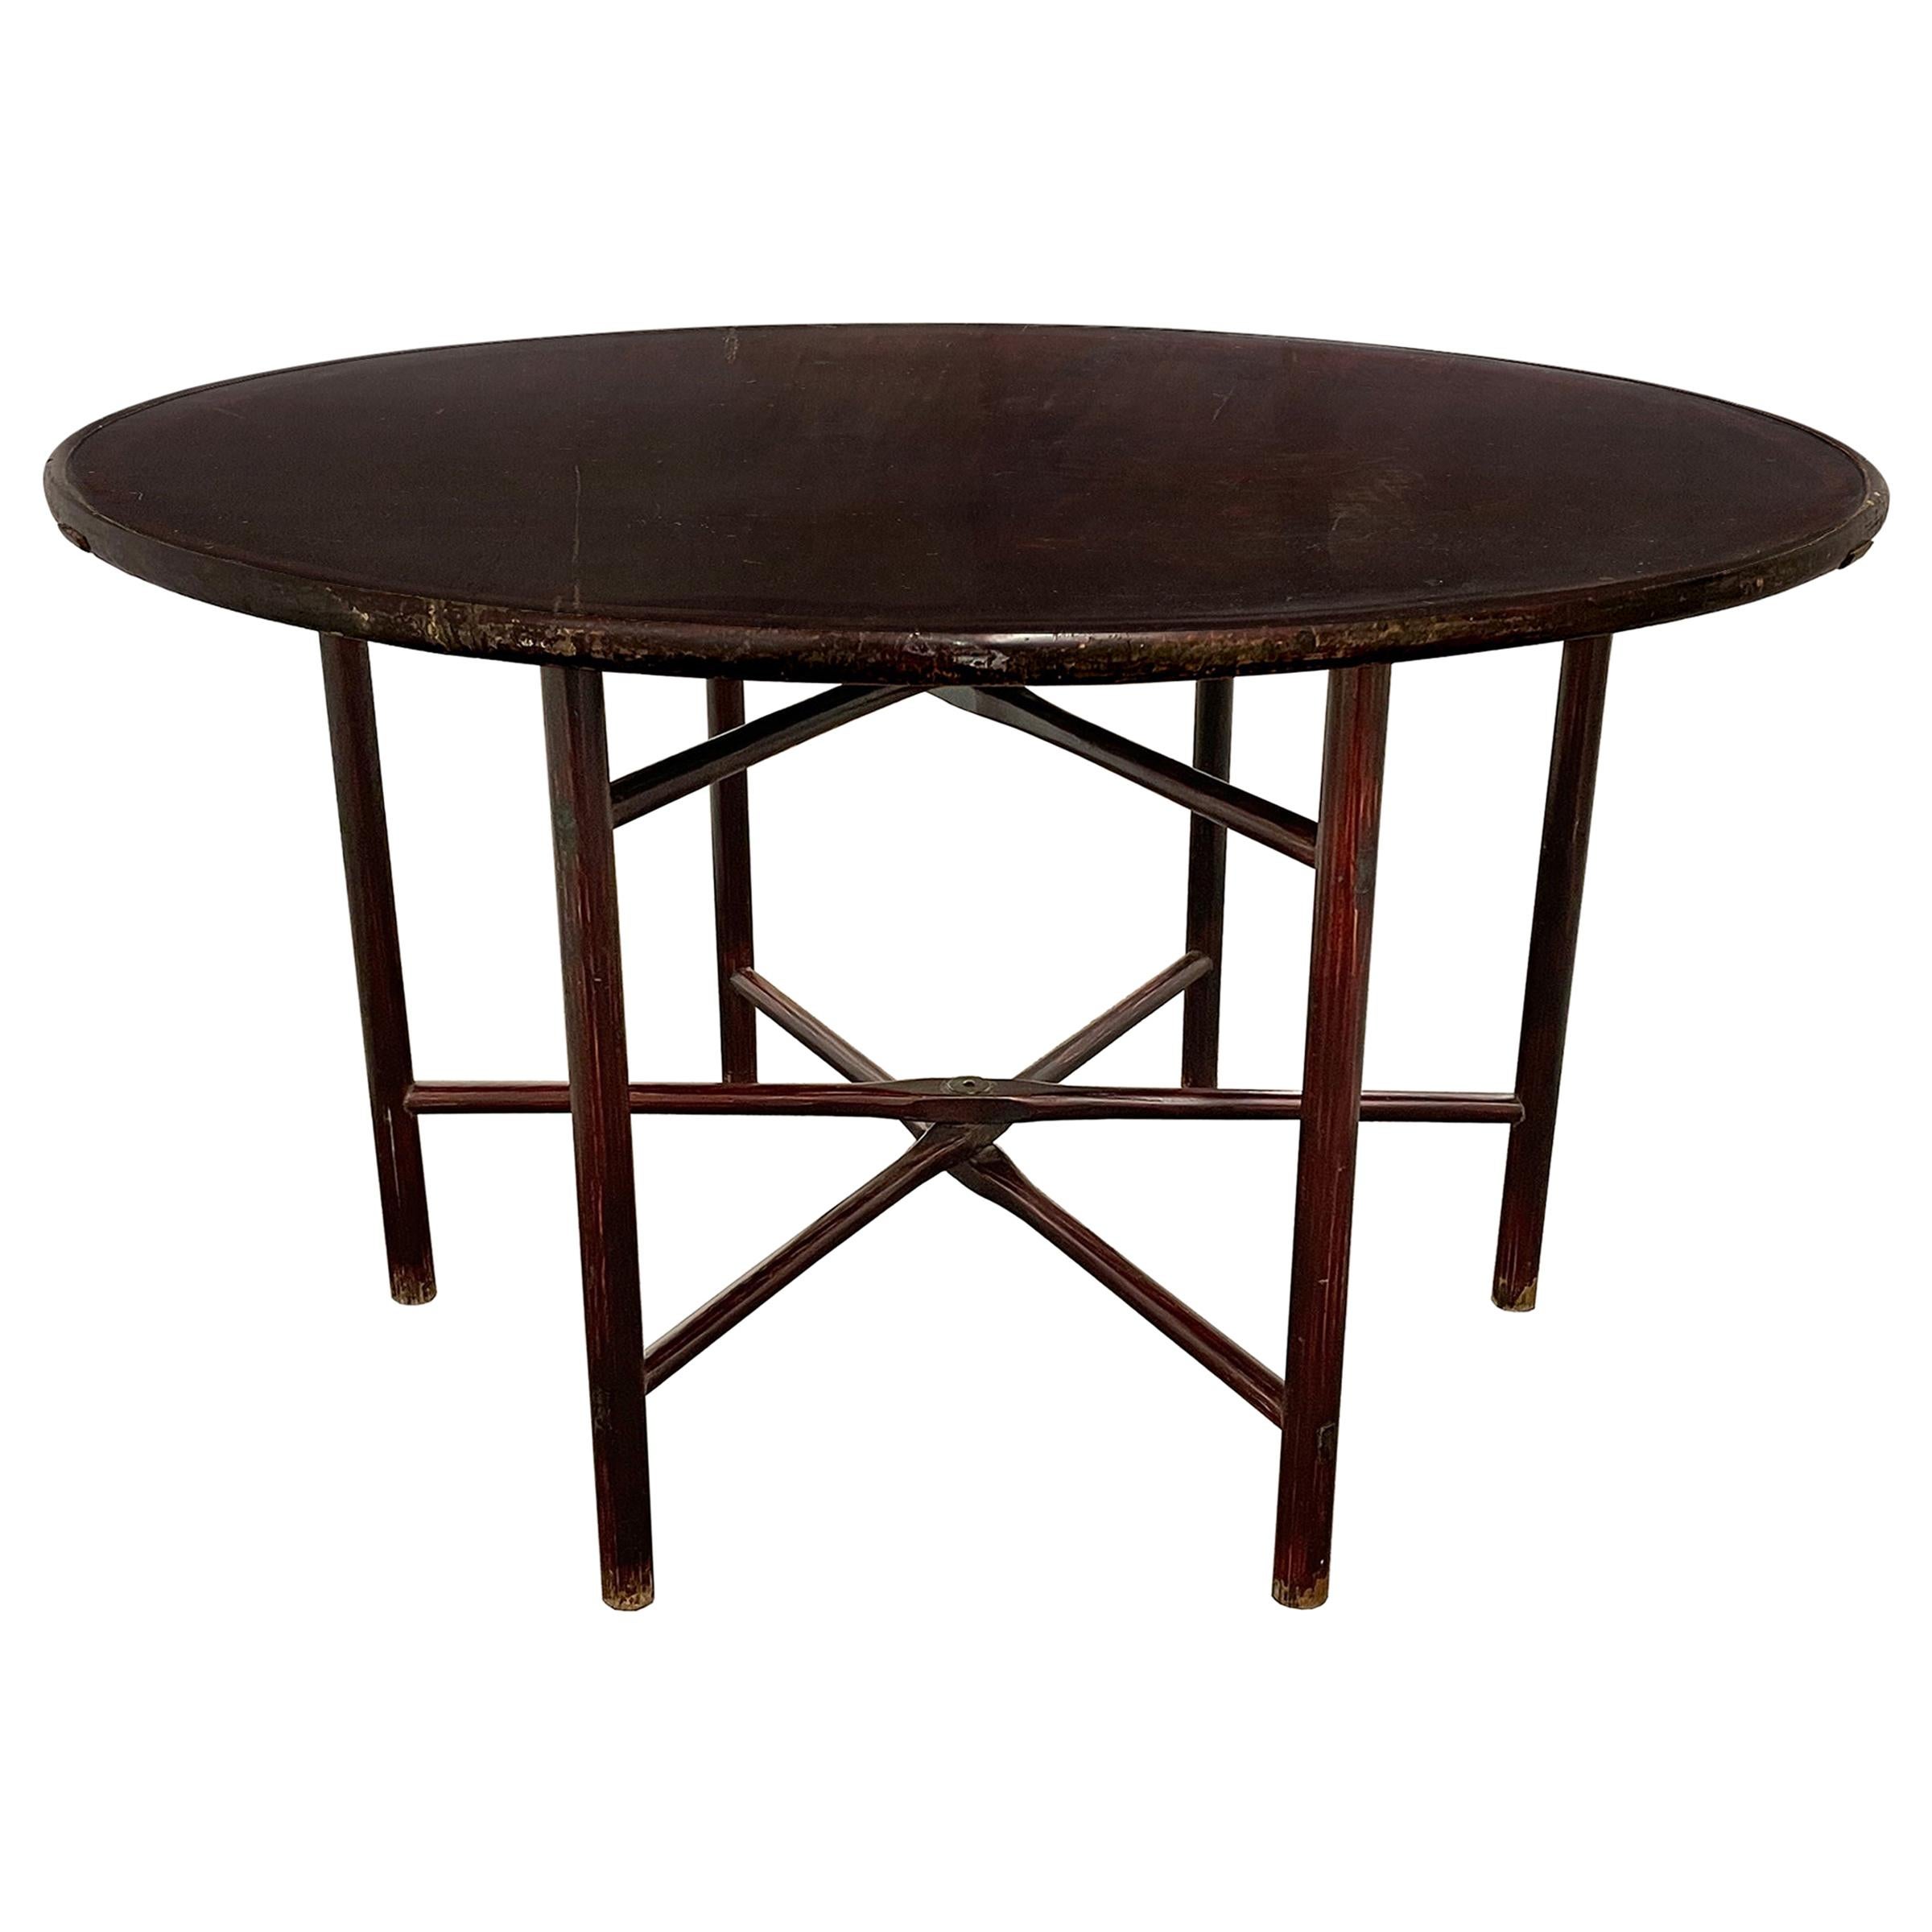 19th Century Chinese Round Table